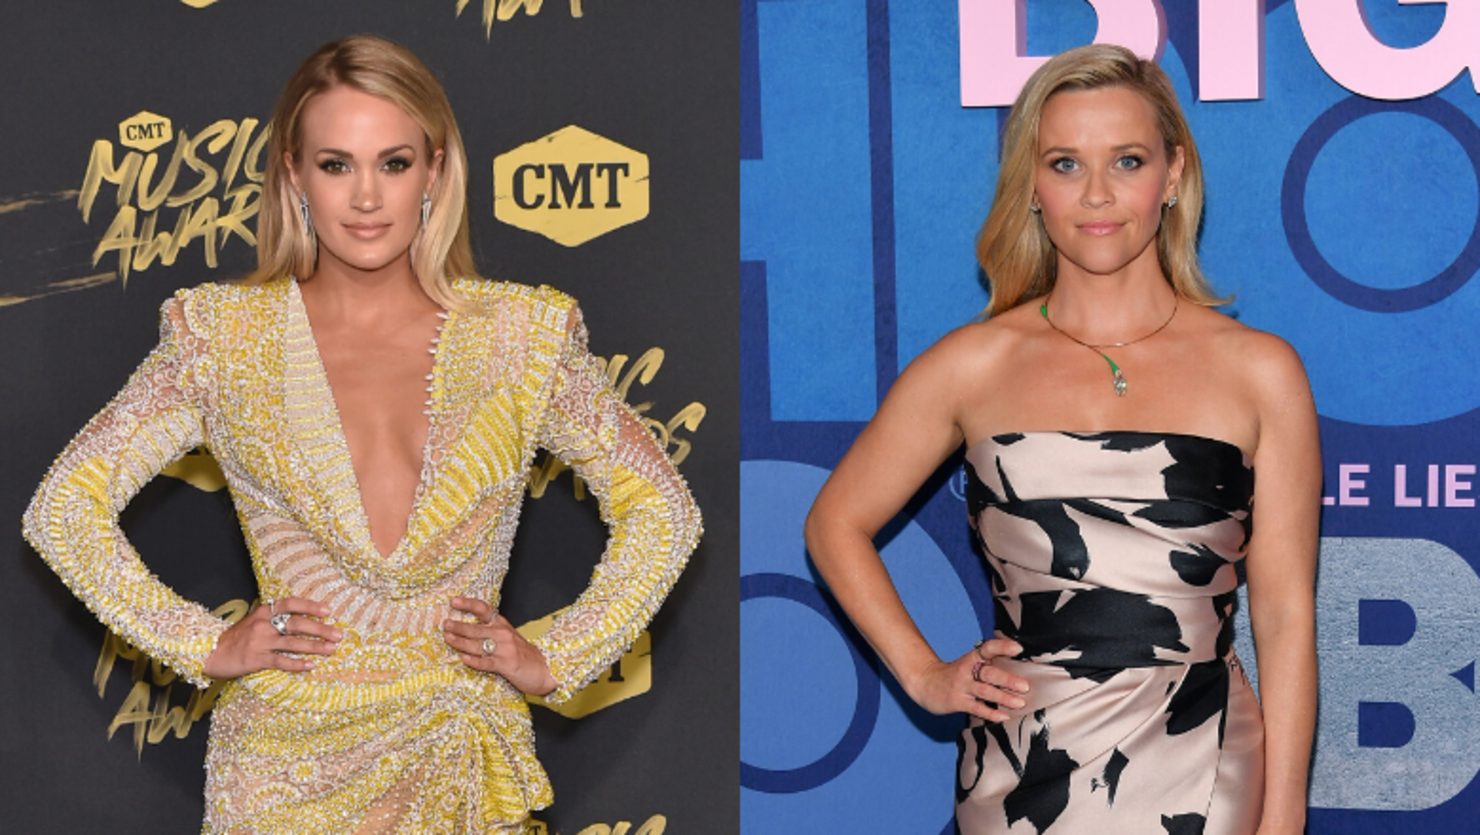 Carrie Underwood Reacts After Fan Mistakes Reese Witherspoon For Her